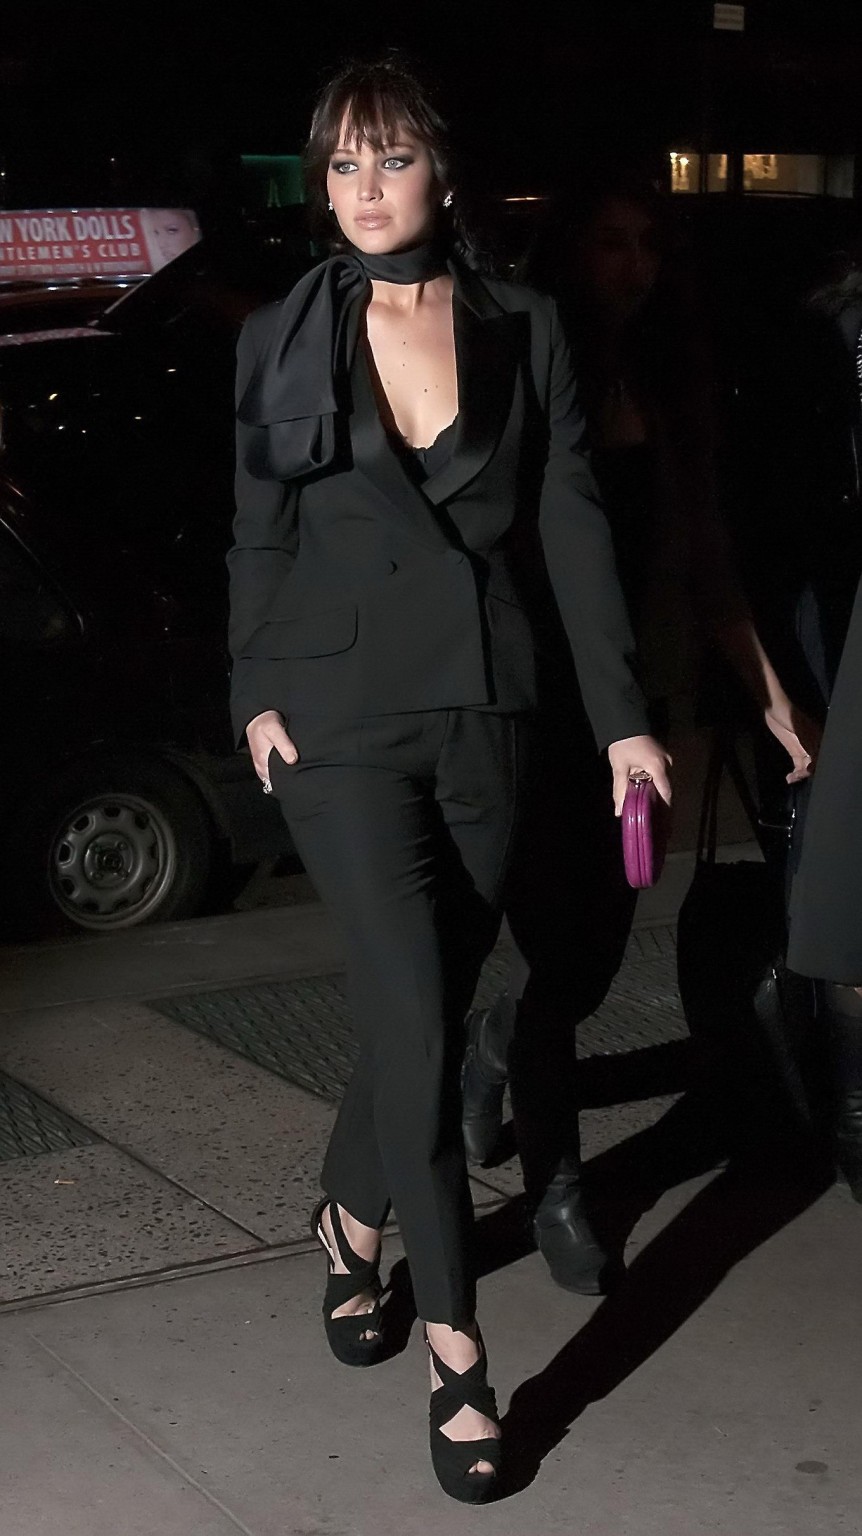 Jennifer Lawrence reggiseno picco a 'the silver linings playbook' premiere in nyc
 #75248492